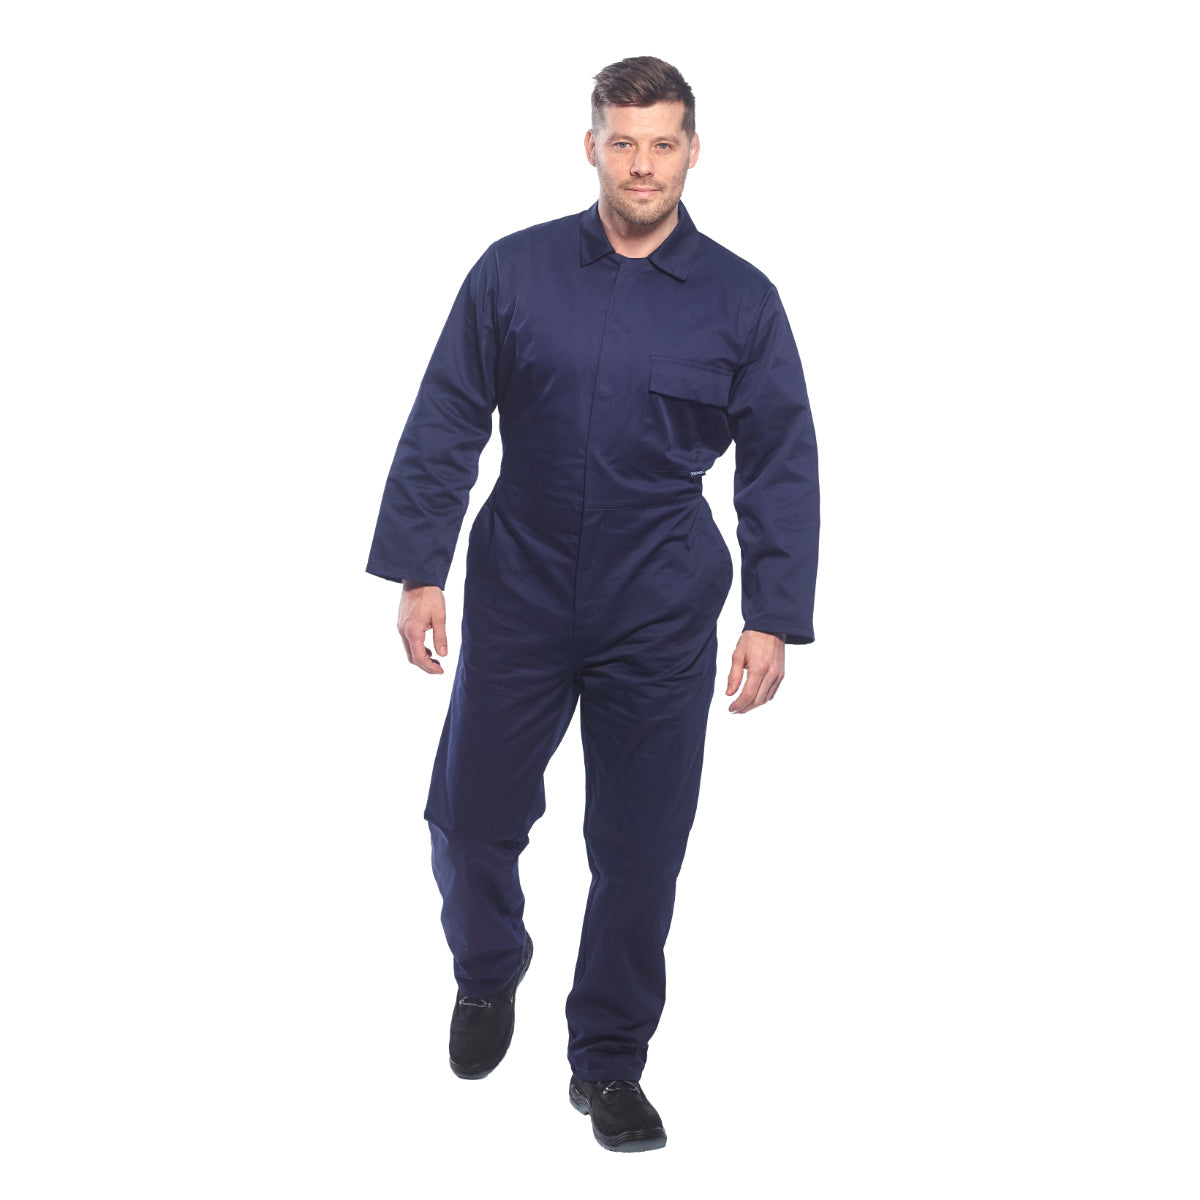 Portwest 2802 Standard Coverall for General Workwear